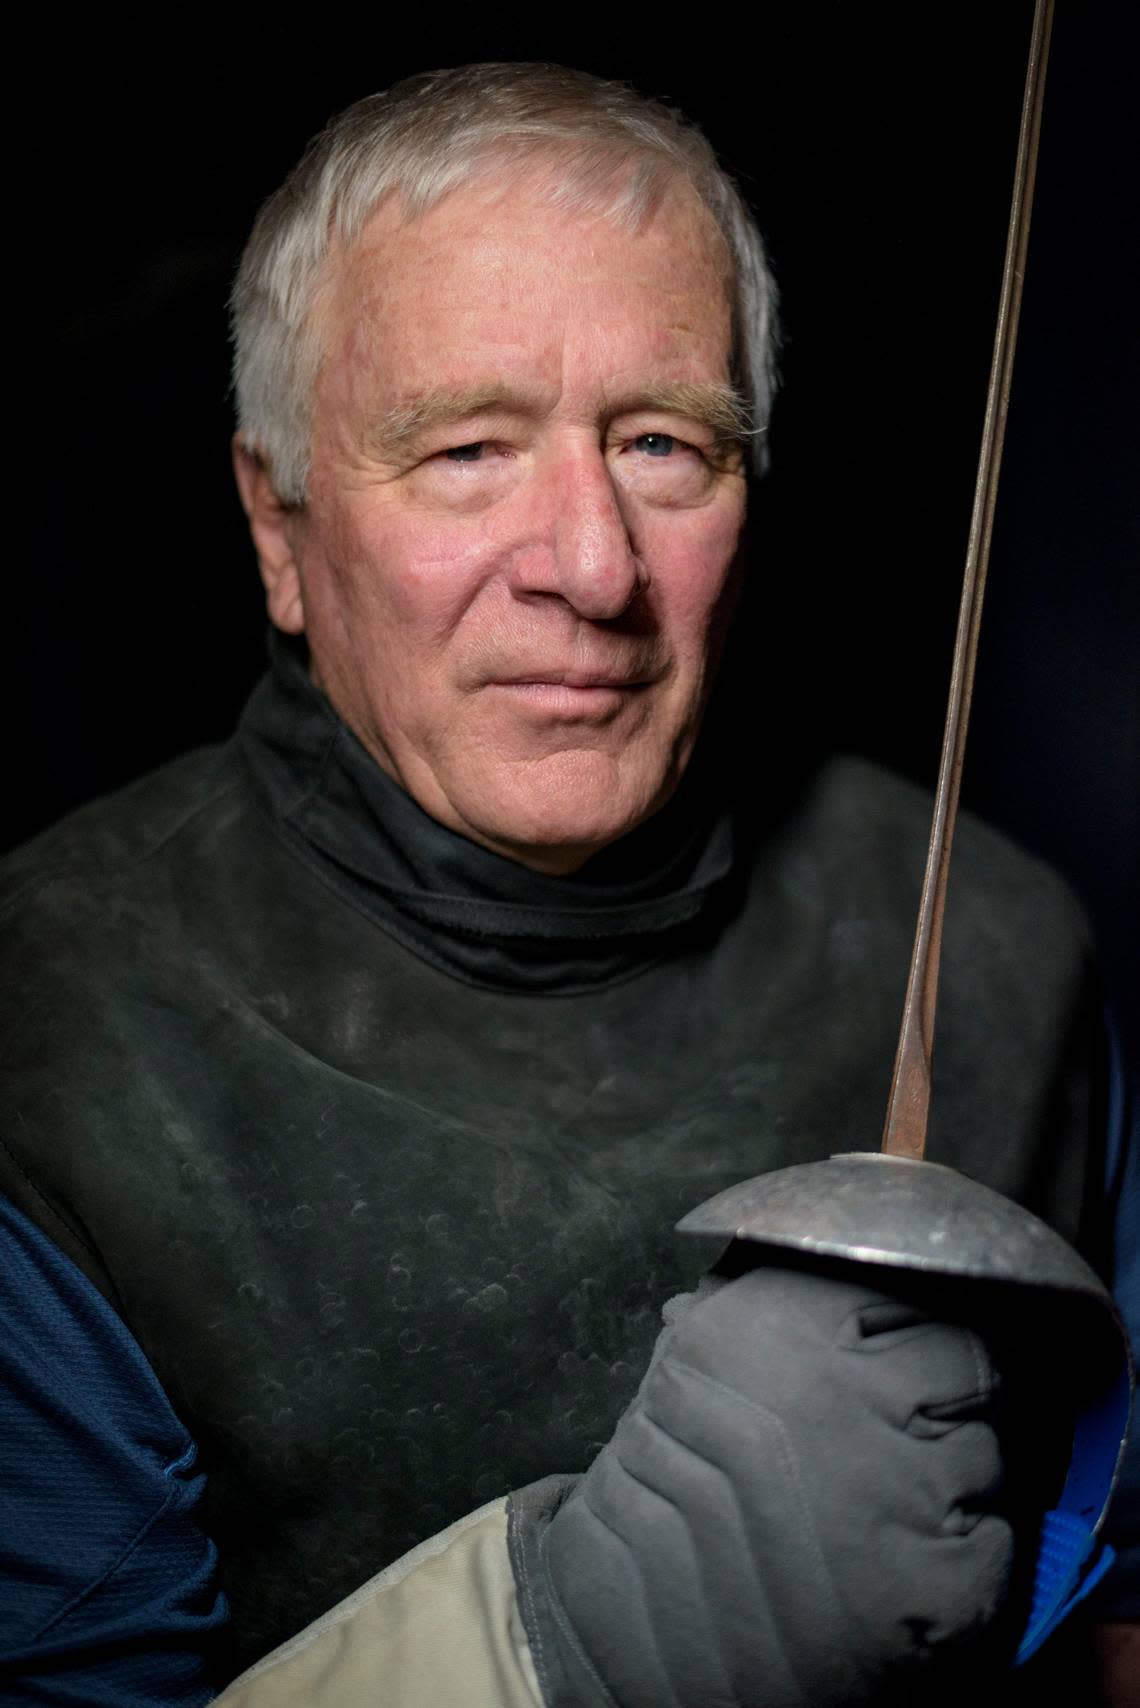 UNC-CH Fencing Head Coach Ron Miller poses for a portrait on June 27, 2019. Miller died in June 2023. He led the UNC fencing program for 52 years and was inducted into the U.S. Fencing Hall of Fame earlier this year.